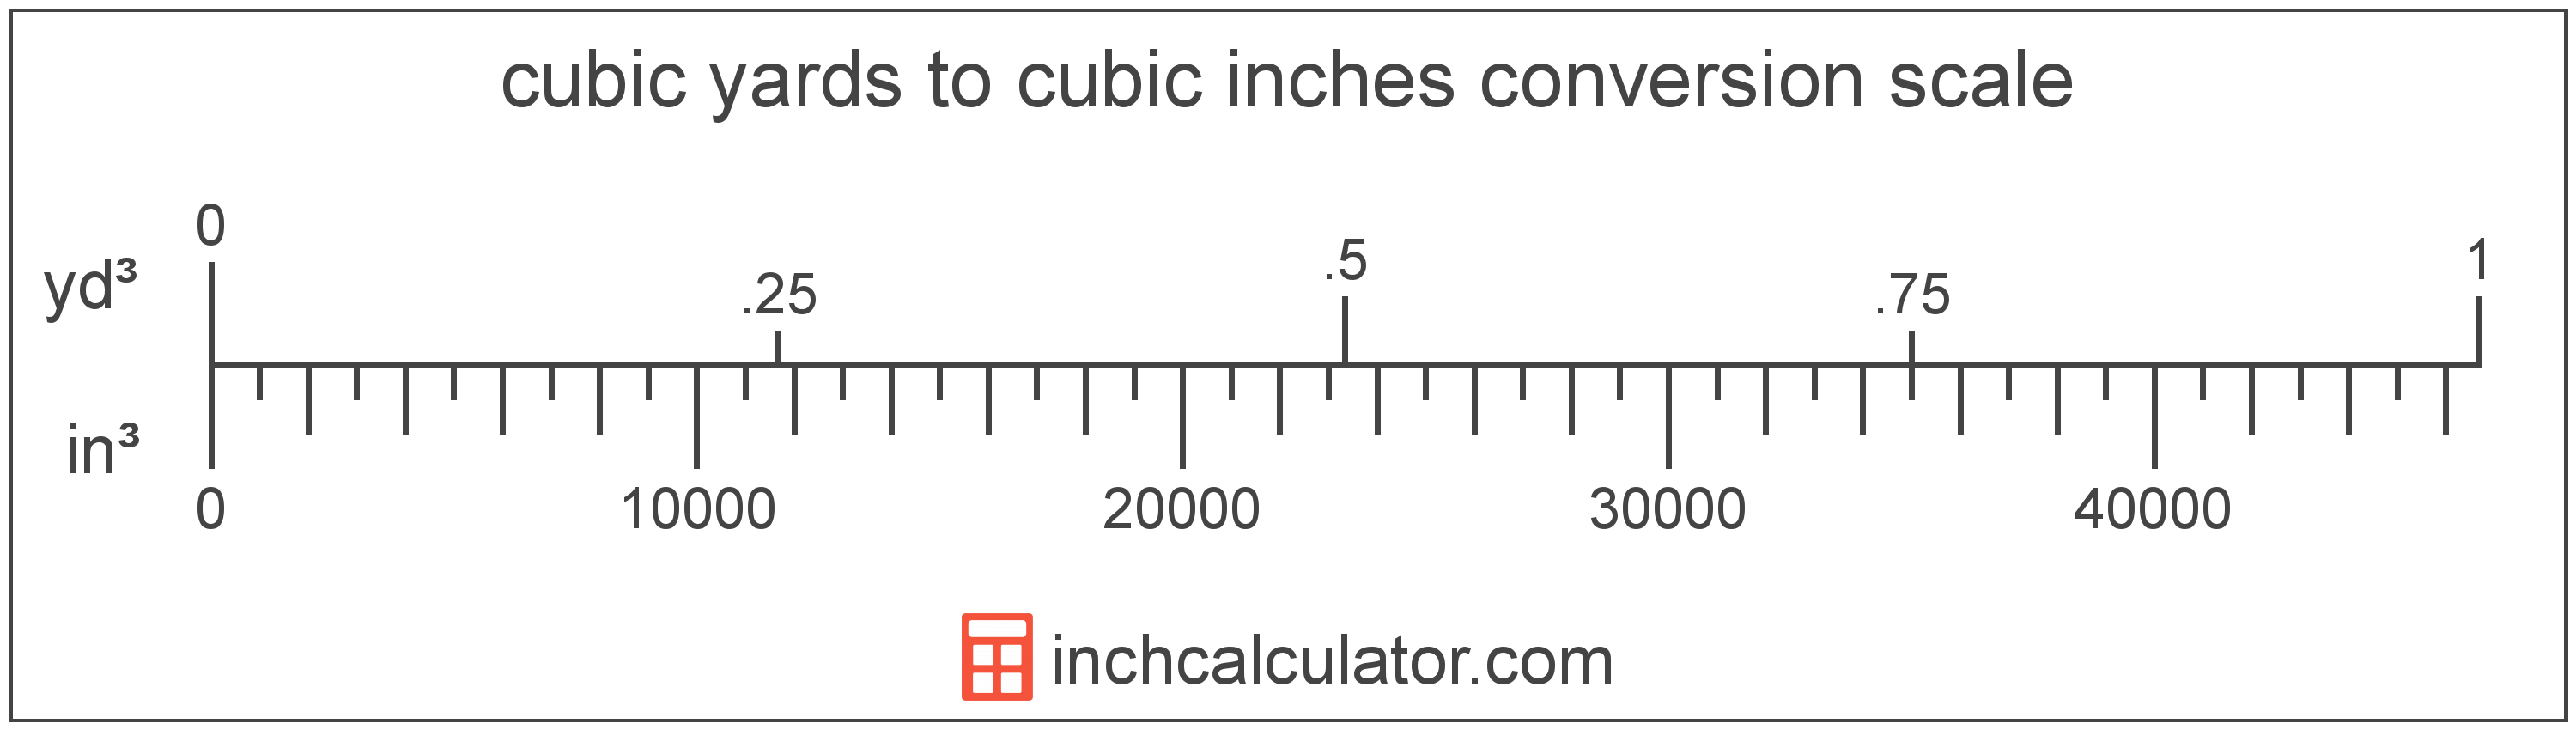 cubic-yards-to-cubic-inches-conversion-yd-to-in